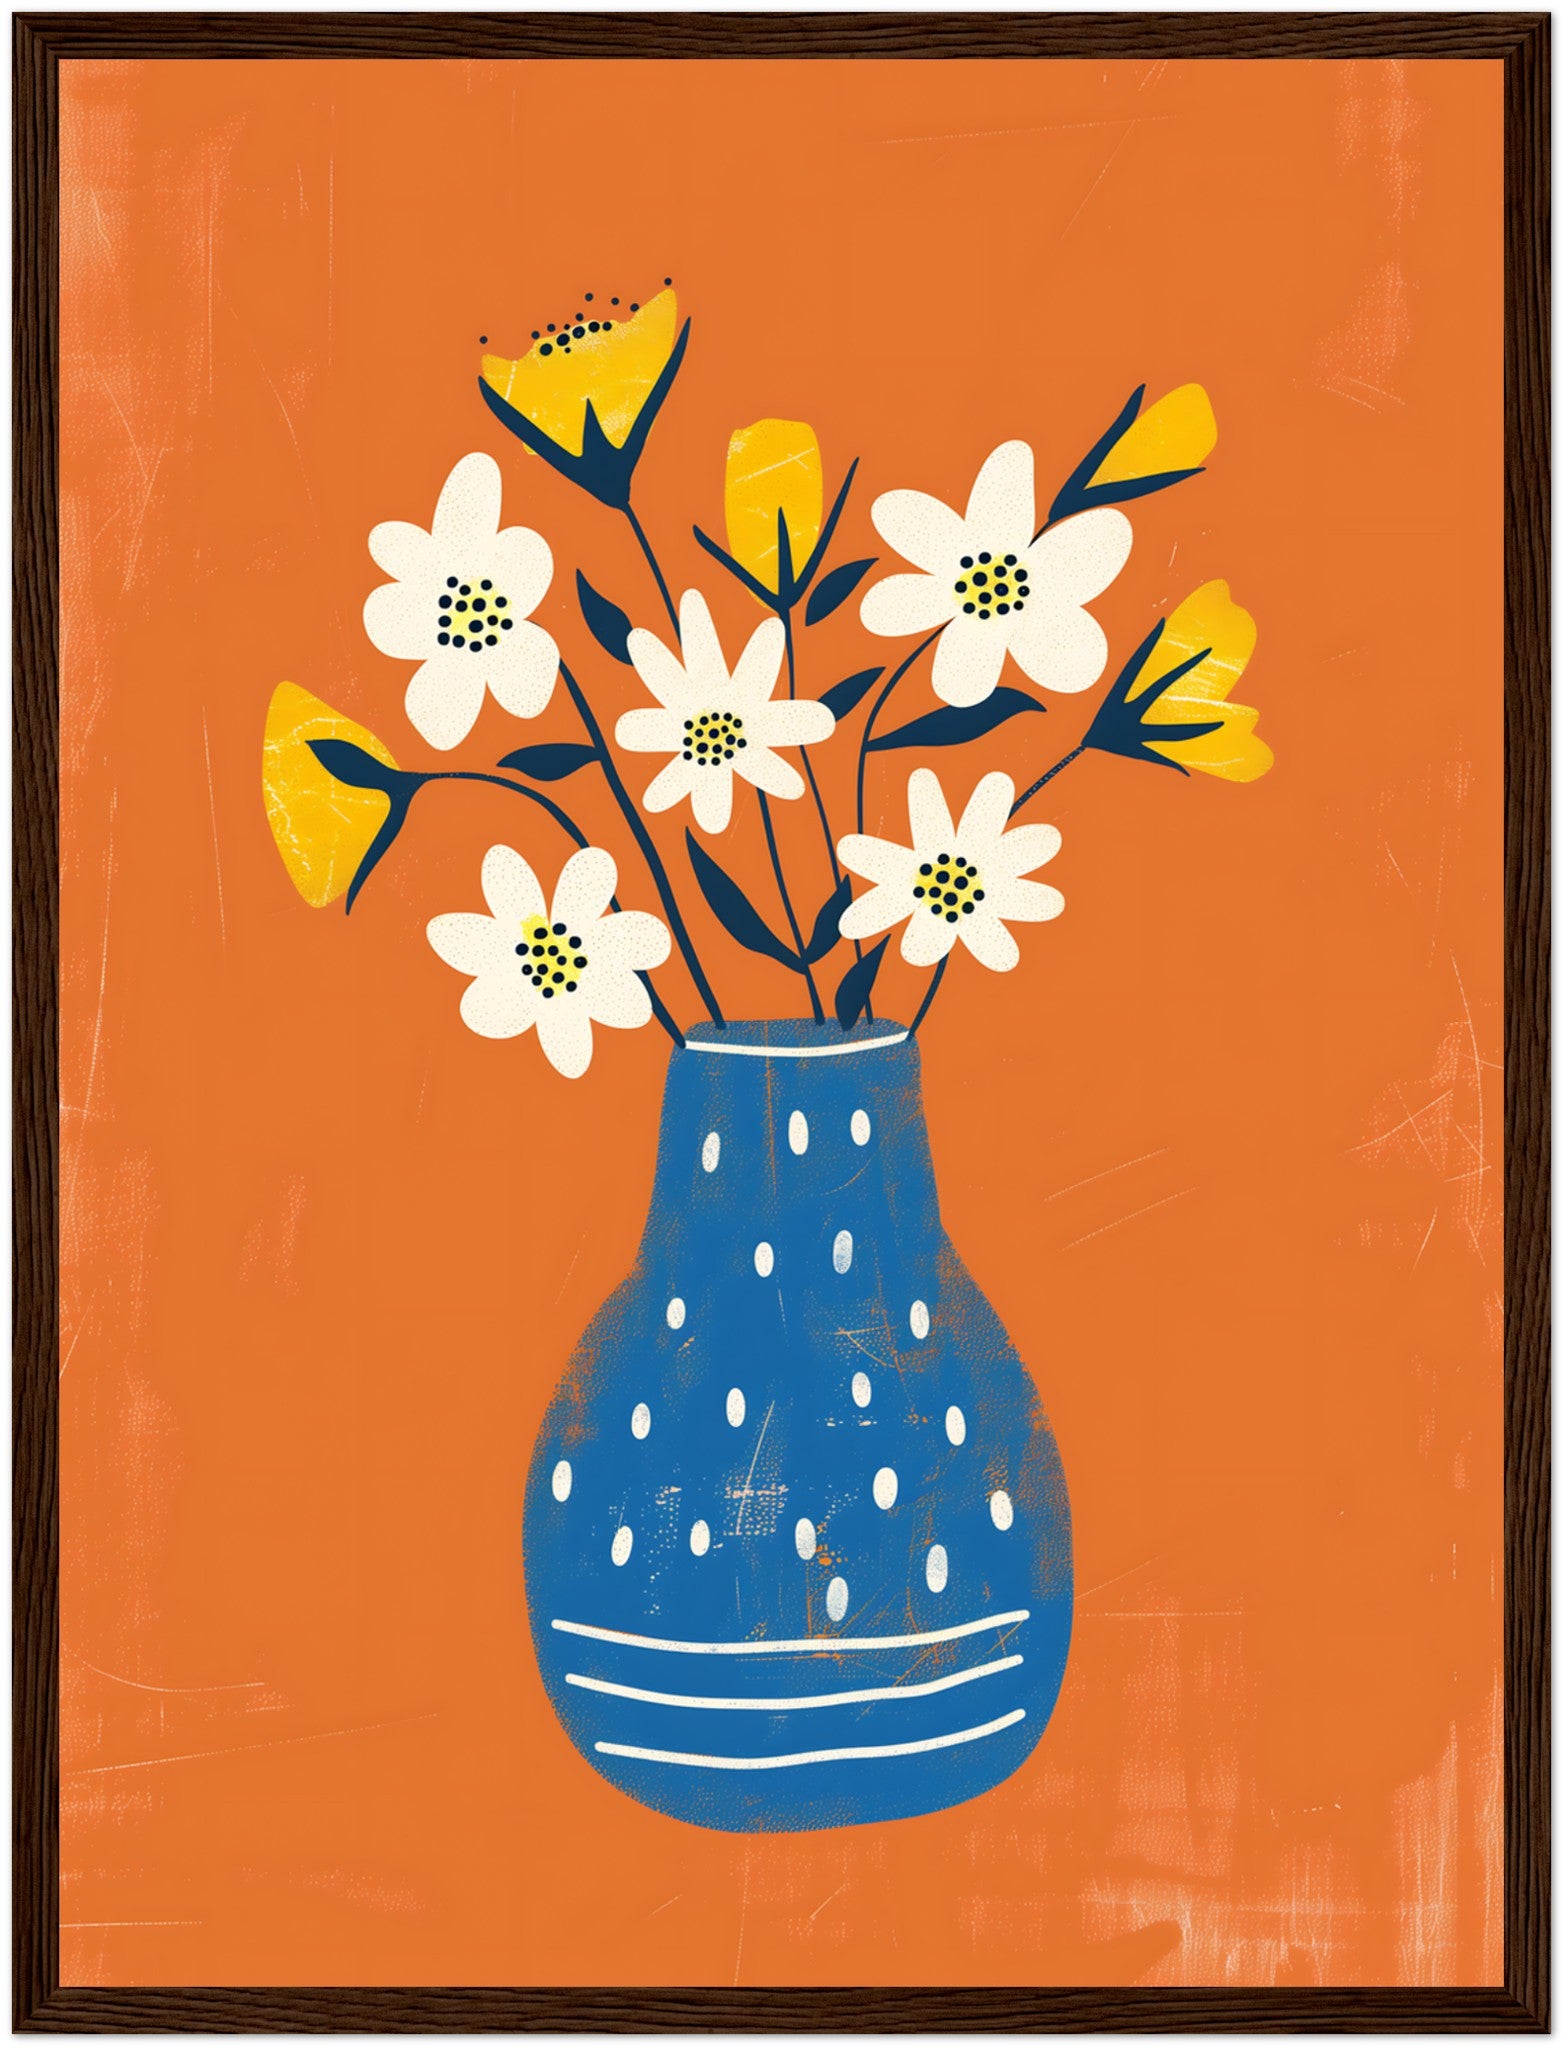 A vibrant illustration of white and yellow flowers in a blue dotted vase on an orange background, framed in brown.